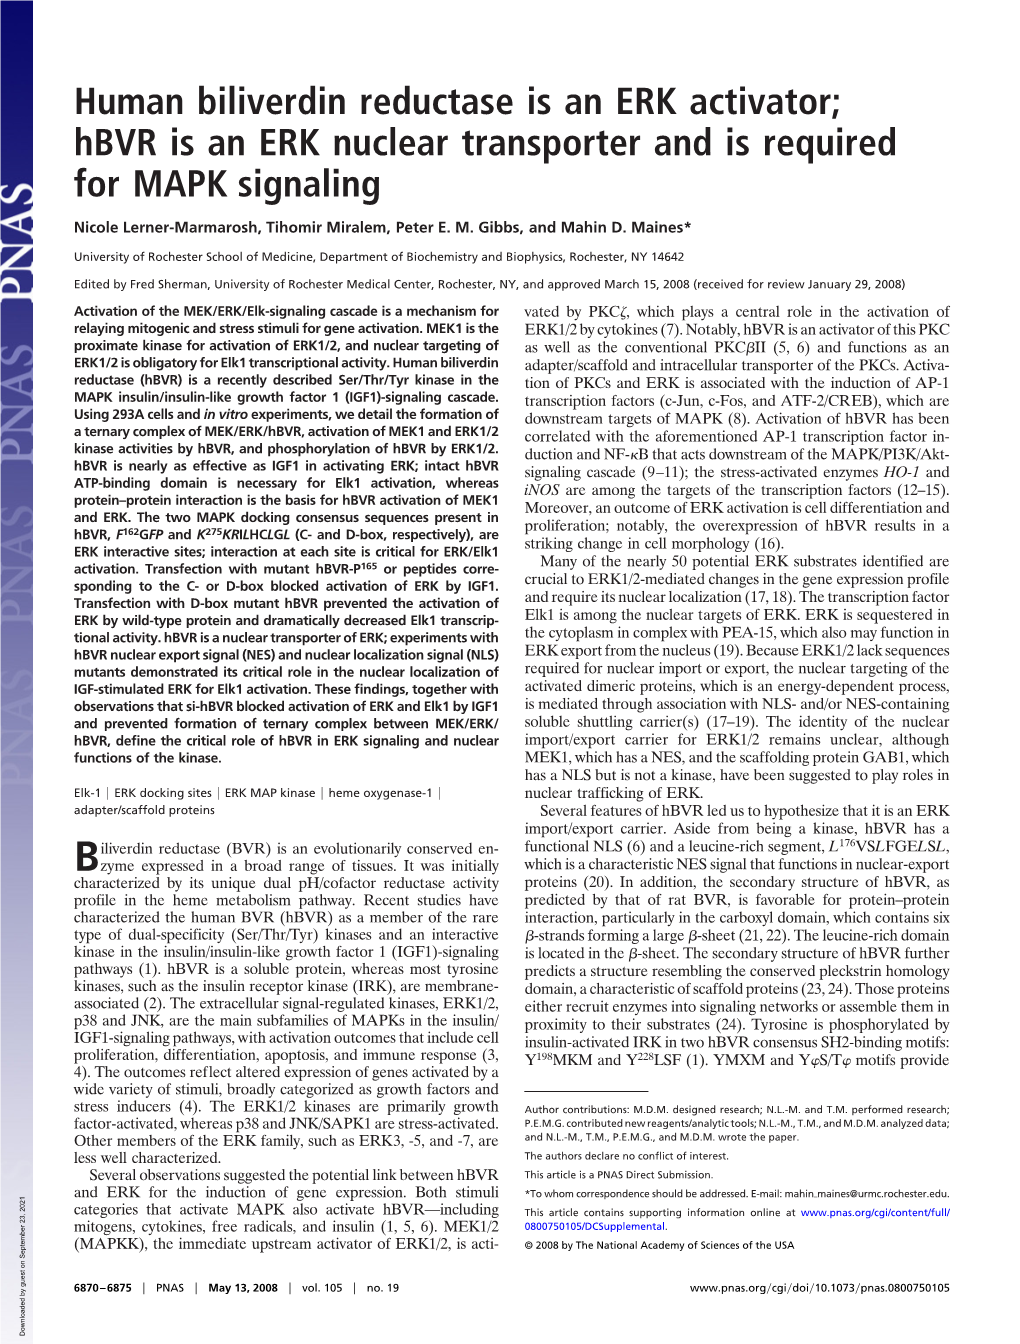 Hbvr Is an ERK Nuclear Transporter and Is Required for MAPK Signaling